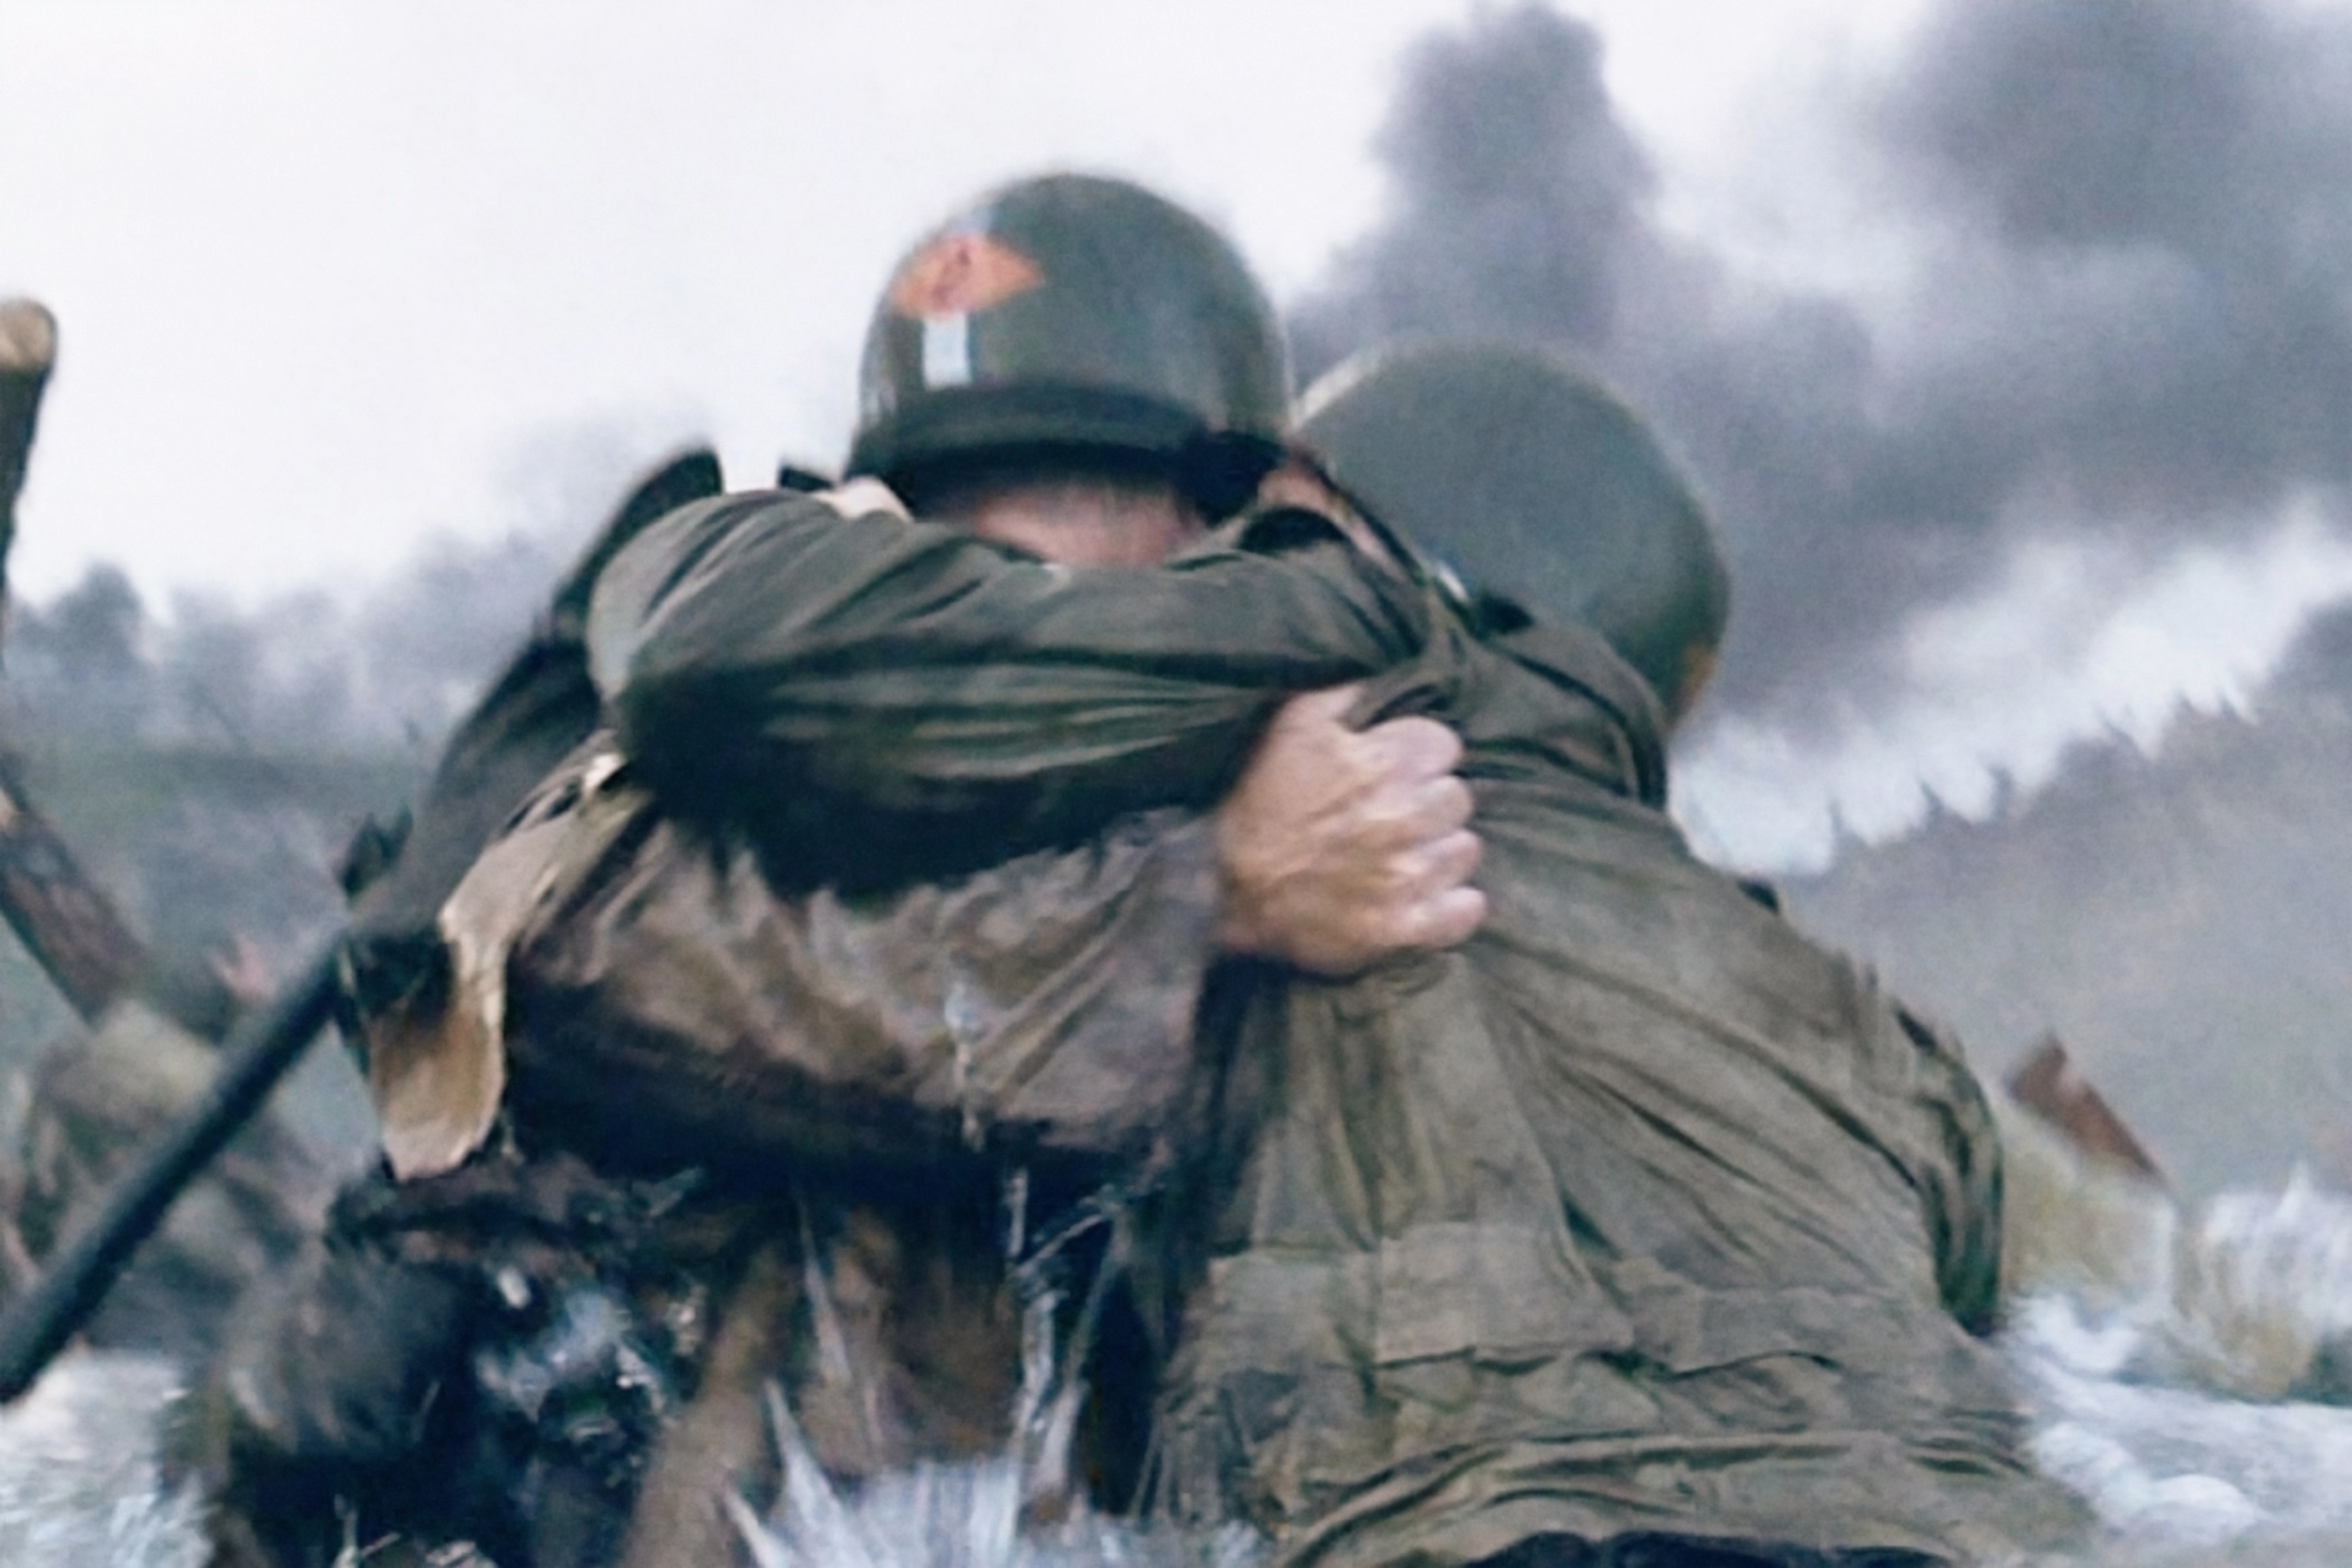 <p>In three different years — 2001, 2002, and 2004 — ABC aired <em>Saving Private Ryan</em> on Veteran’s Day. Not only that, they aired it uncut and with limited commercial interruptions. That meant keeping the violence and the language intact. The reason 2004 might have been the final year is that that year a lot of ABC stations decided to preempt airing of the film. The speculation is that they were afraid of being fined for language by the FCC in the wake of that year’s Super Bowl halftime show controversy surrounding Justin Timberlake and Janet Jackson. While no complaints were filed and no fines were levied,<em> Saving Private Ryan</em> was no longer a Veteran’s Day screening after that.</p><p><a href='https://www.msn.com/en-us/community/channel/vid-cj9pqbr0vn9in2b6ddcd8sfgpfq6x6utp44fssrv6mc2gtybw0us'>Did you enjoy this slideshow? Follow us on MSN to see more of our exclusive entertainment content.</a></p>